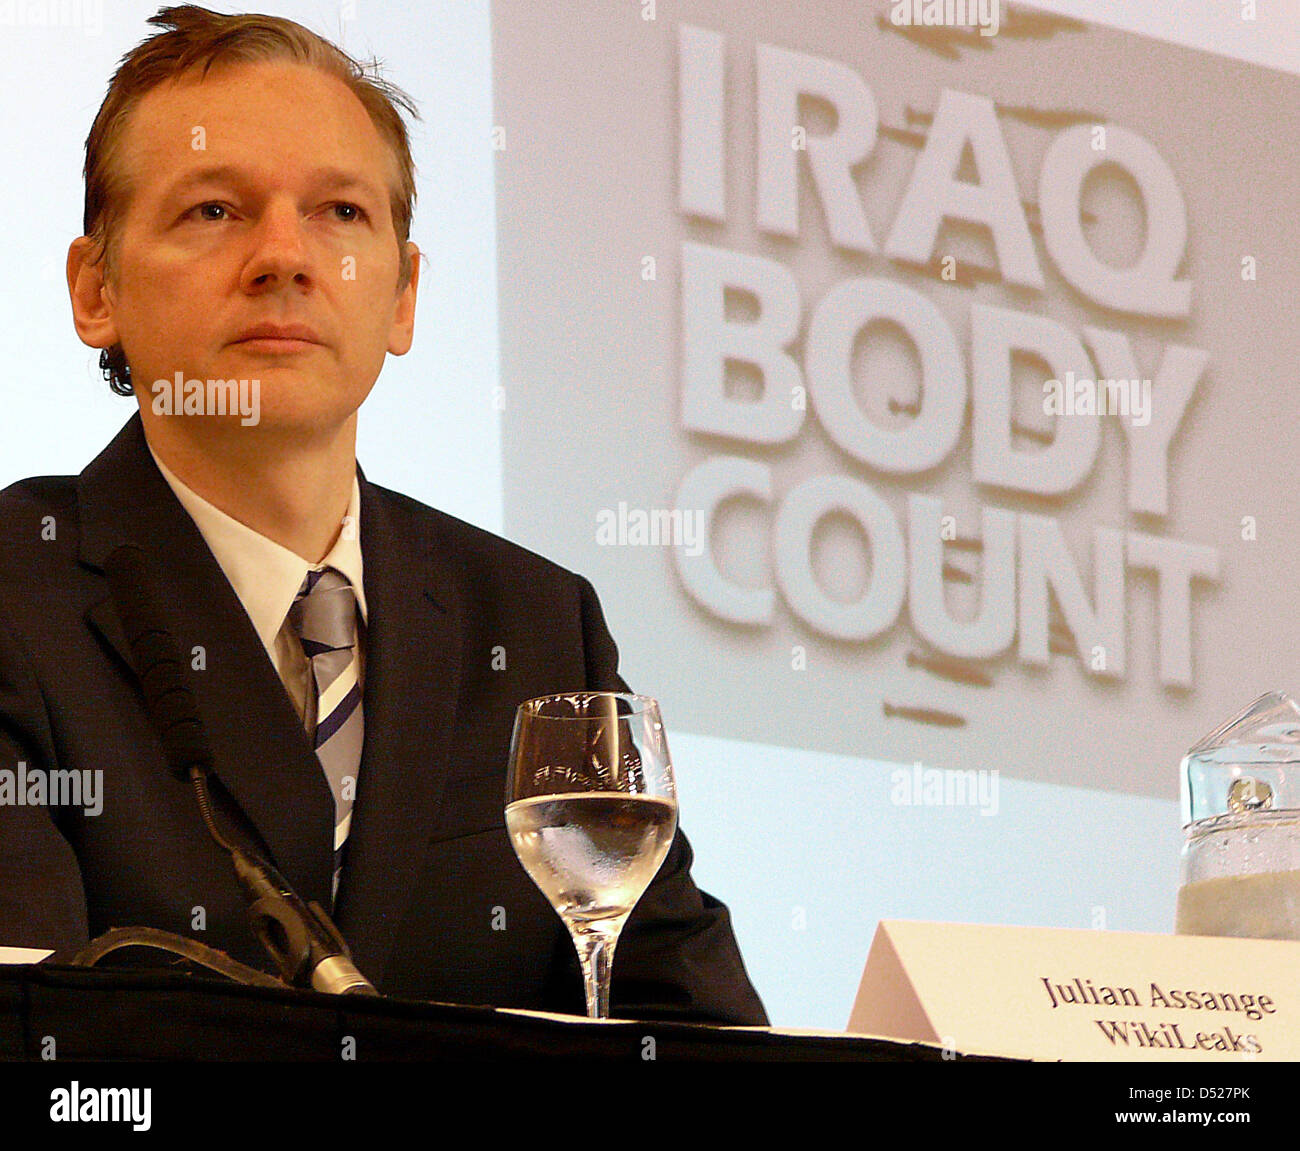 Wikileaks founder Julian Assange speaks during a joint press conference in South London, Britain, 23 October 2010. A total of 400 000 new American military documents have been exposed by Wikileaks website. The files include torture details of Iraqis and how the abuse of detainees by Iraqi police was ignored by the US forces. Foto:  Cordula  Donhauser Stock Photo